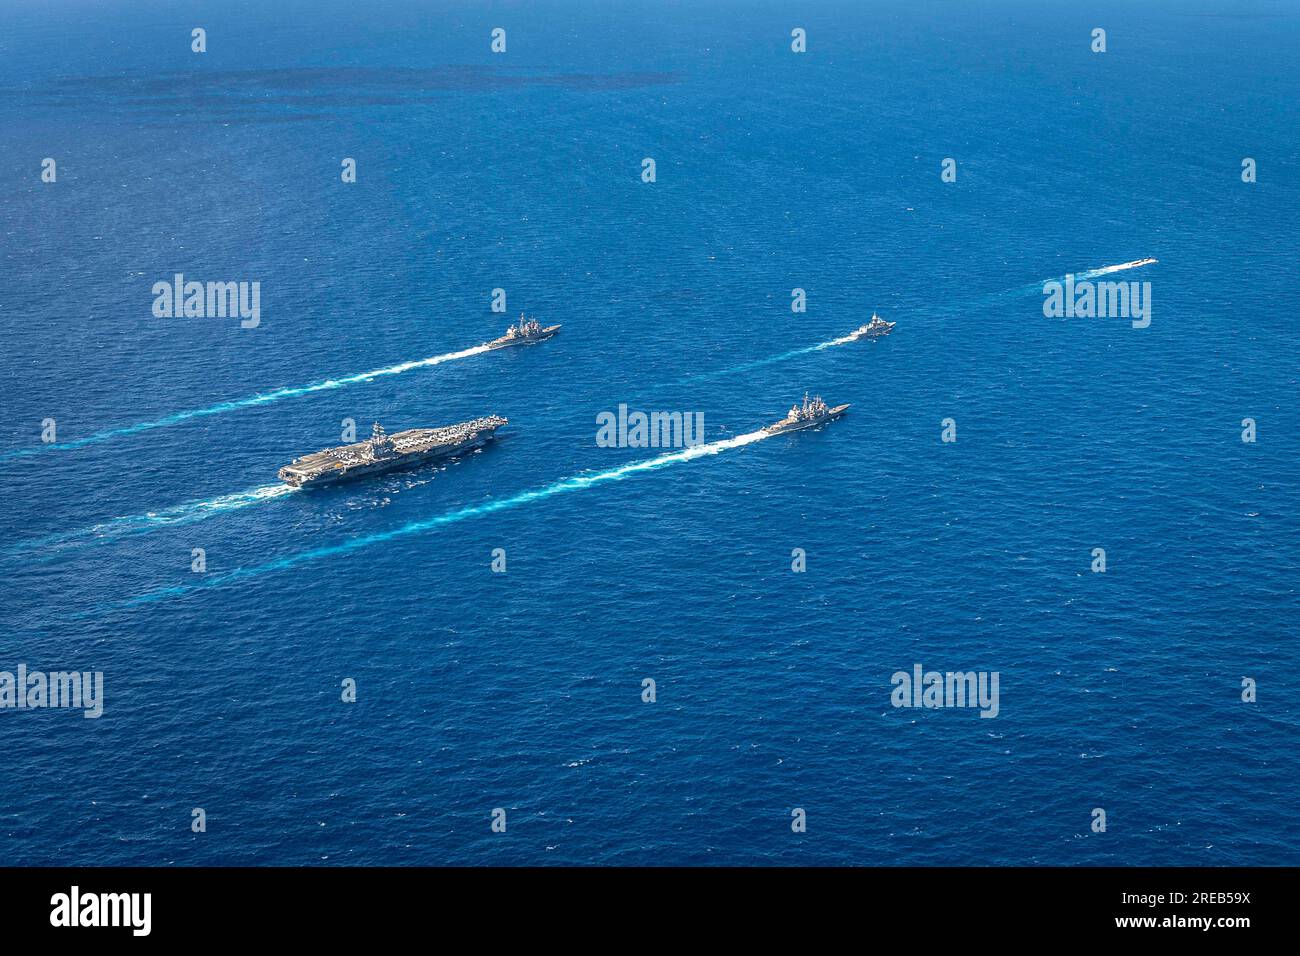 INDIAN OCEAN (July 22, 2023) The U.S. Navy’s only forward-deployed aircraft carrier, USS Ronald Reagan (CVN 76), steams in formation with the Royal Australian Navy ship HMAS Perth (FFH 157), as well as the Virginia-class fast-attack submarine USS North Carolina (SSN 777) and Ticonderoga-class guided-missile cruisers USS Robert Smalls (CG 62) and USS Antietam (CG 54), during Talisman Sabre 23 in the Indian Ocean, July 22, 2023.                Ronald Reagan, the flagship of Carrier Strike Group 5, provides a combat-ready force that protects and defends the United States, and supports alliances, Stock Photo